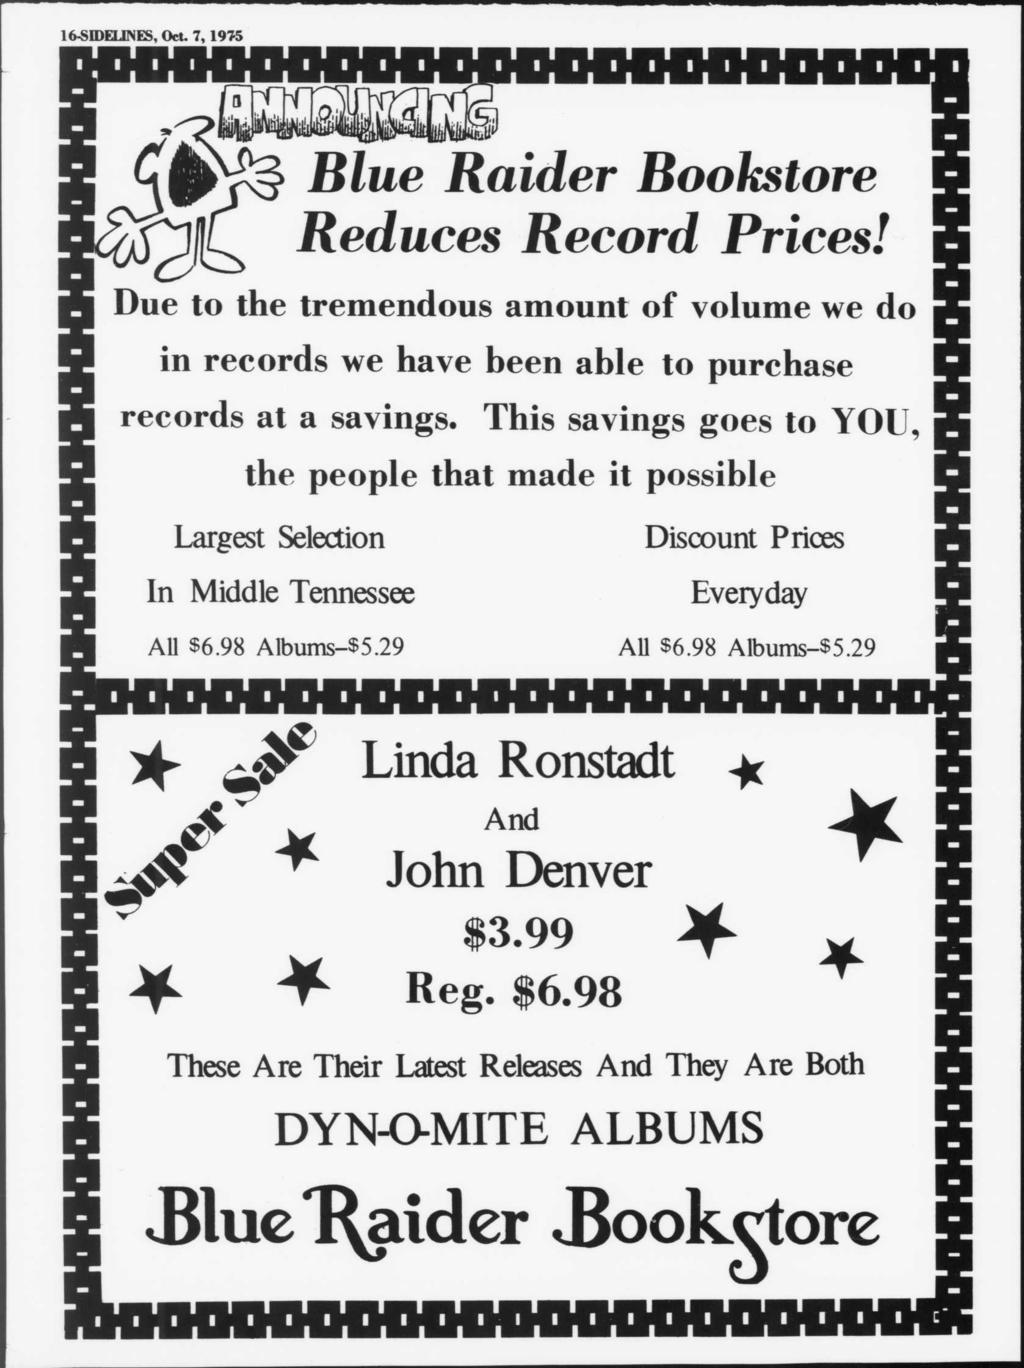 16-SDEUNES, Oct. 7,1975 ^ Blue Rader Bookstore Reduces Record Prces! Due to the tremendous amount of volume we do n records we have been able to purchase records at a savngs.